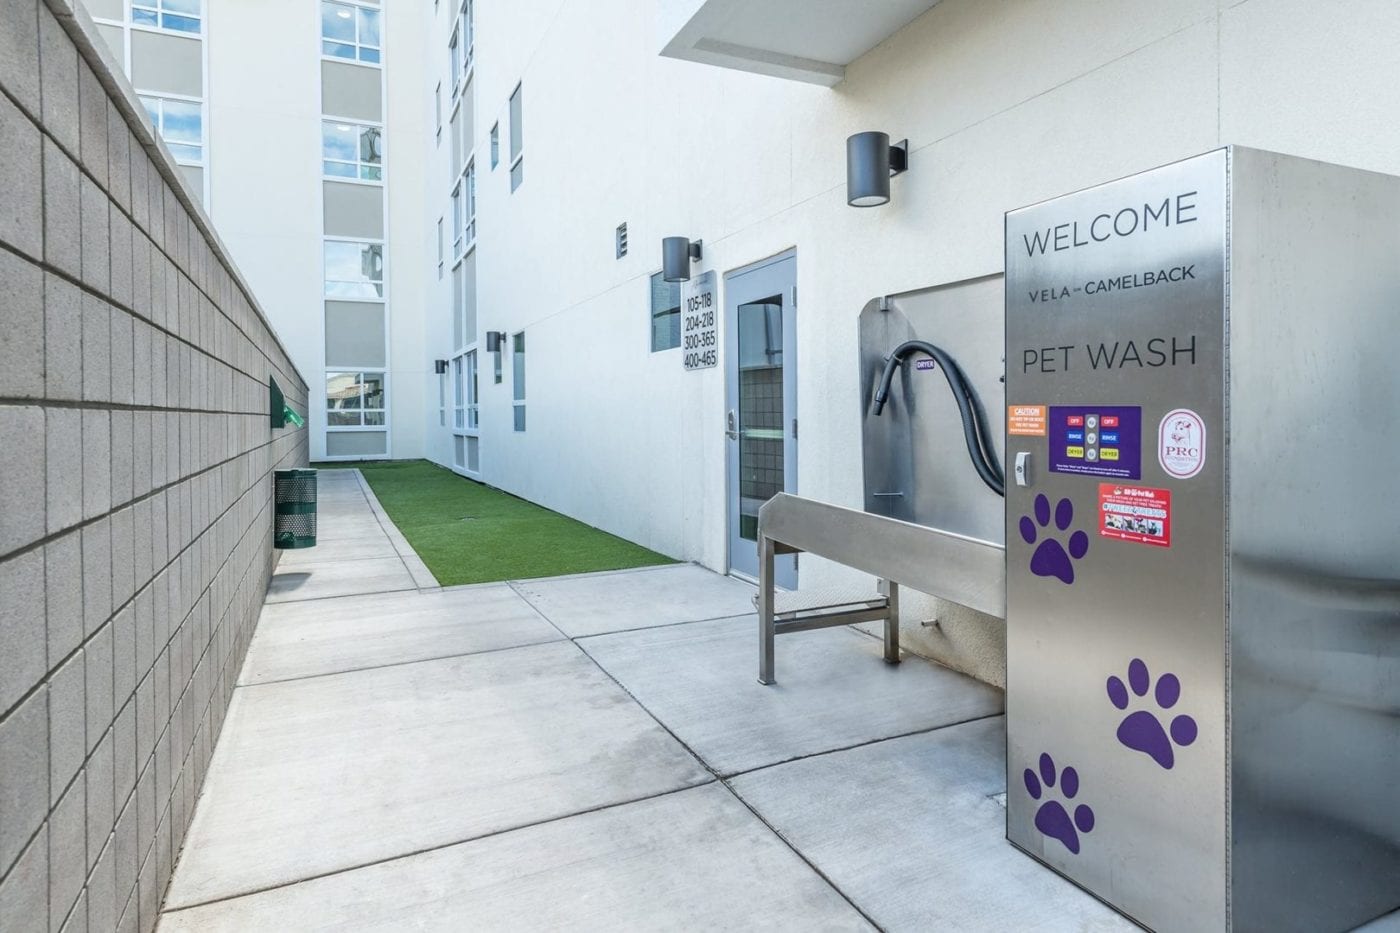 Pet Friendly Apartments in Phoenix, AZ - Community Outdoor Pet Wash Station with Rinse and Dry Option.